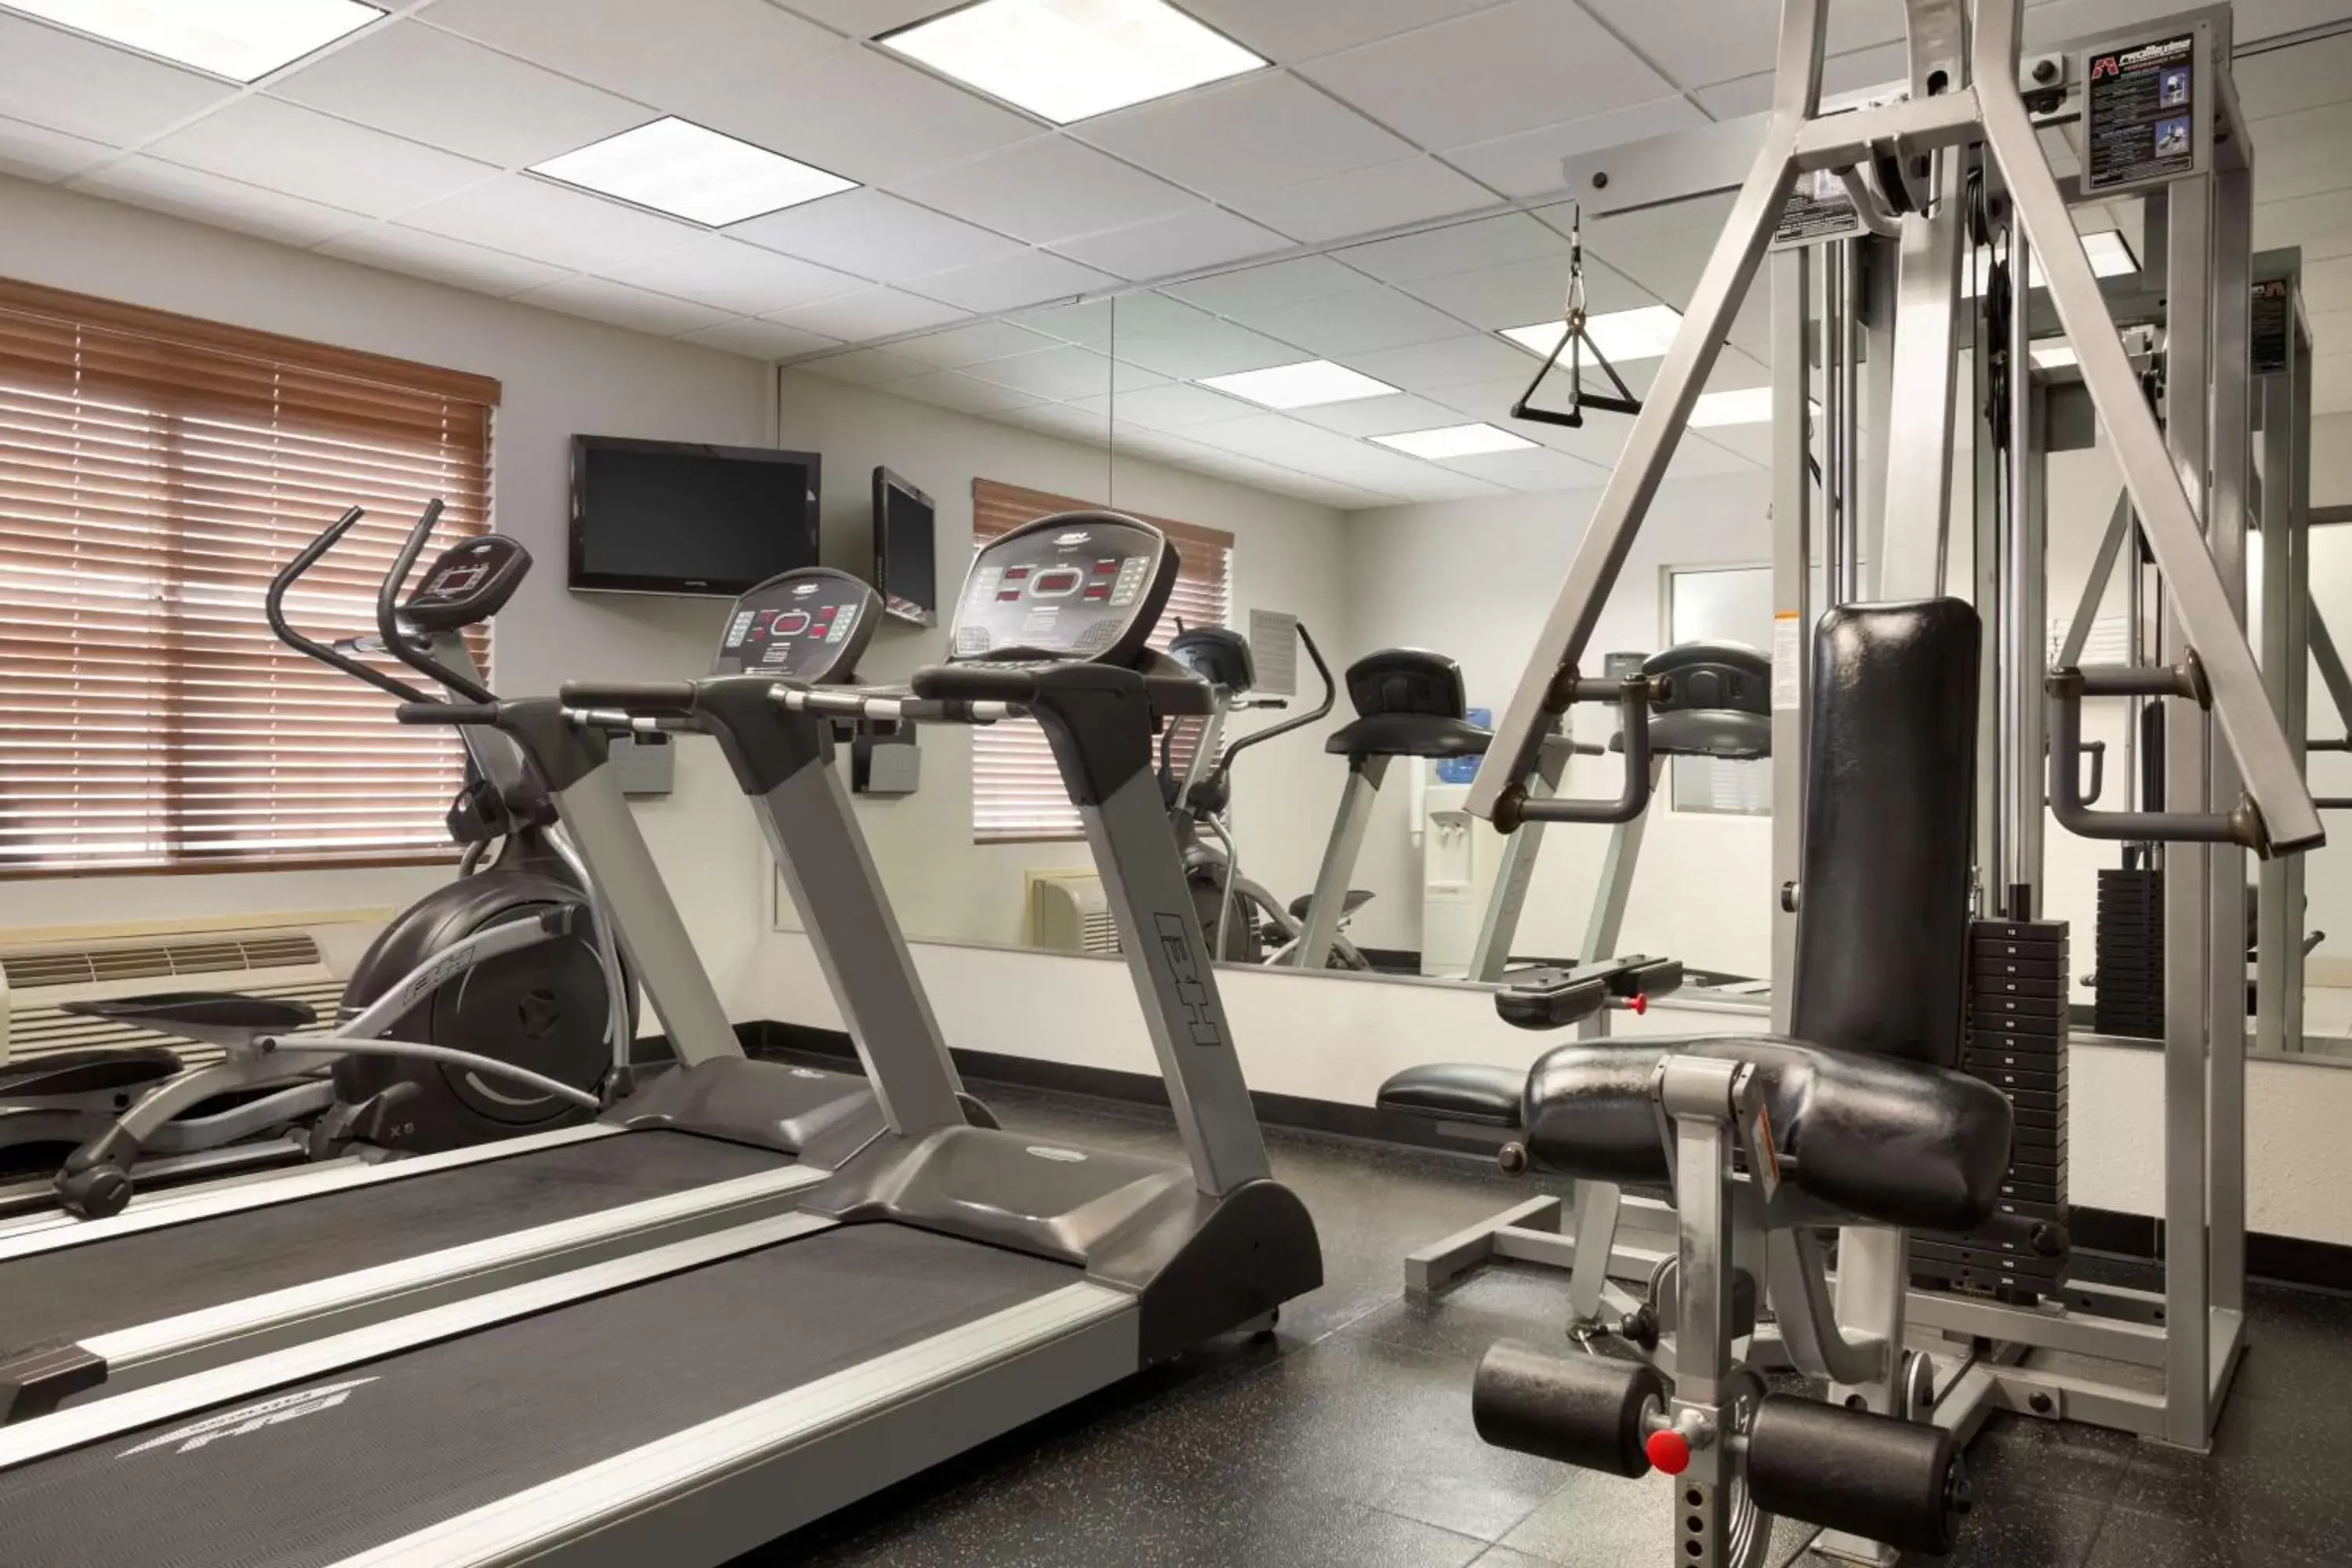 Activities, Fitness Center/Facilities in Country Inn & Suites by Radisson, DFW Airport South, TX